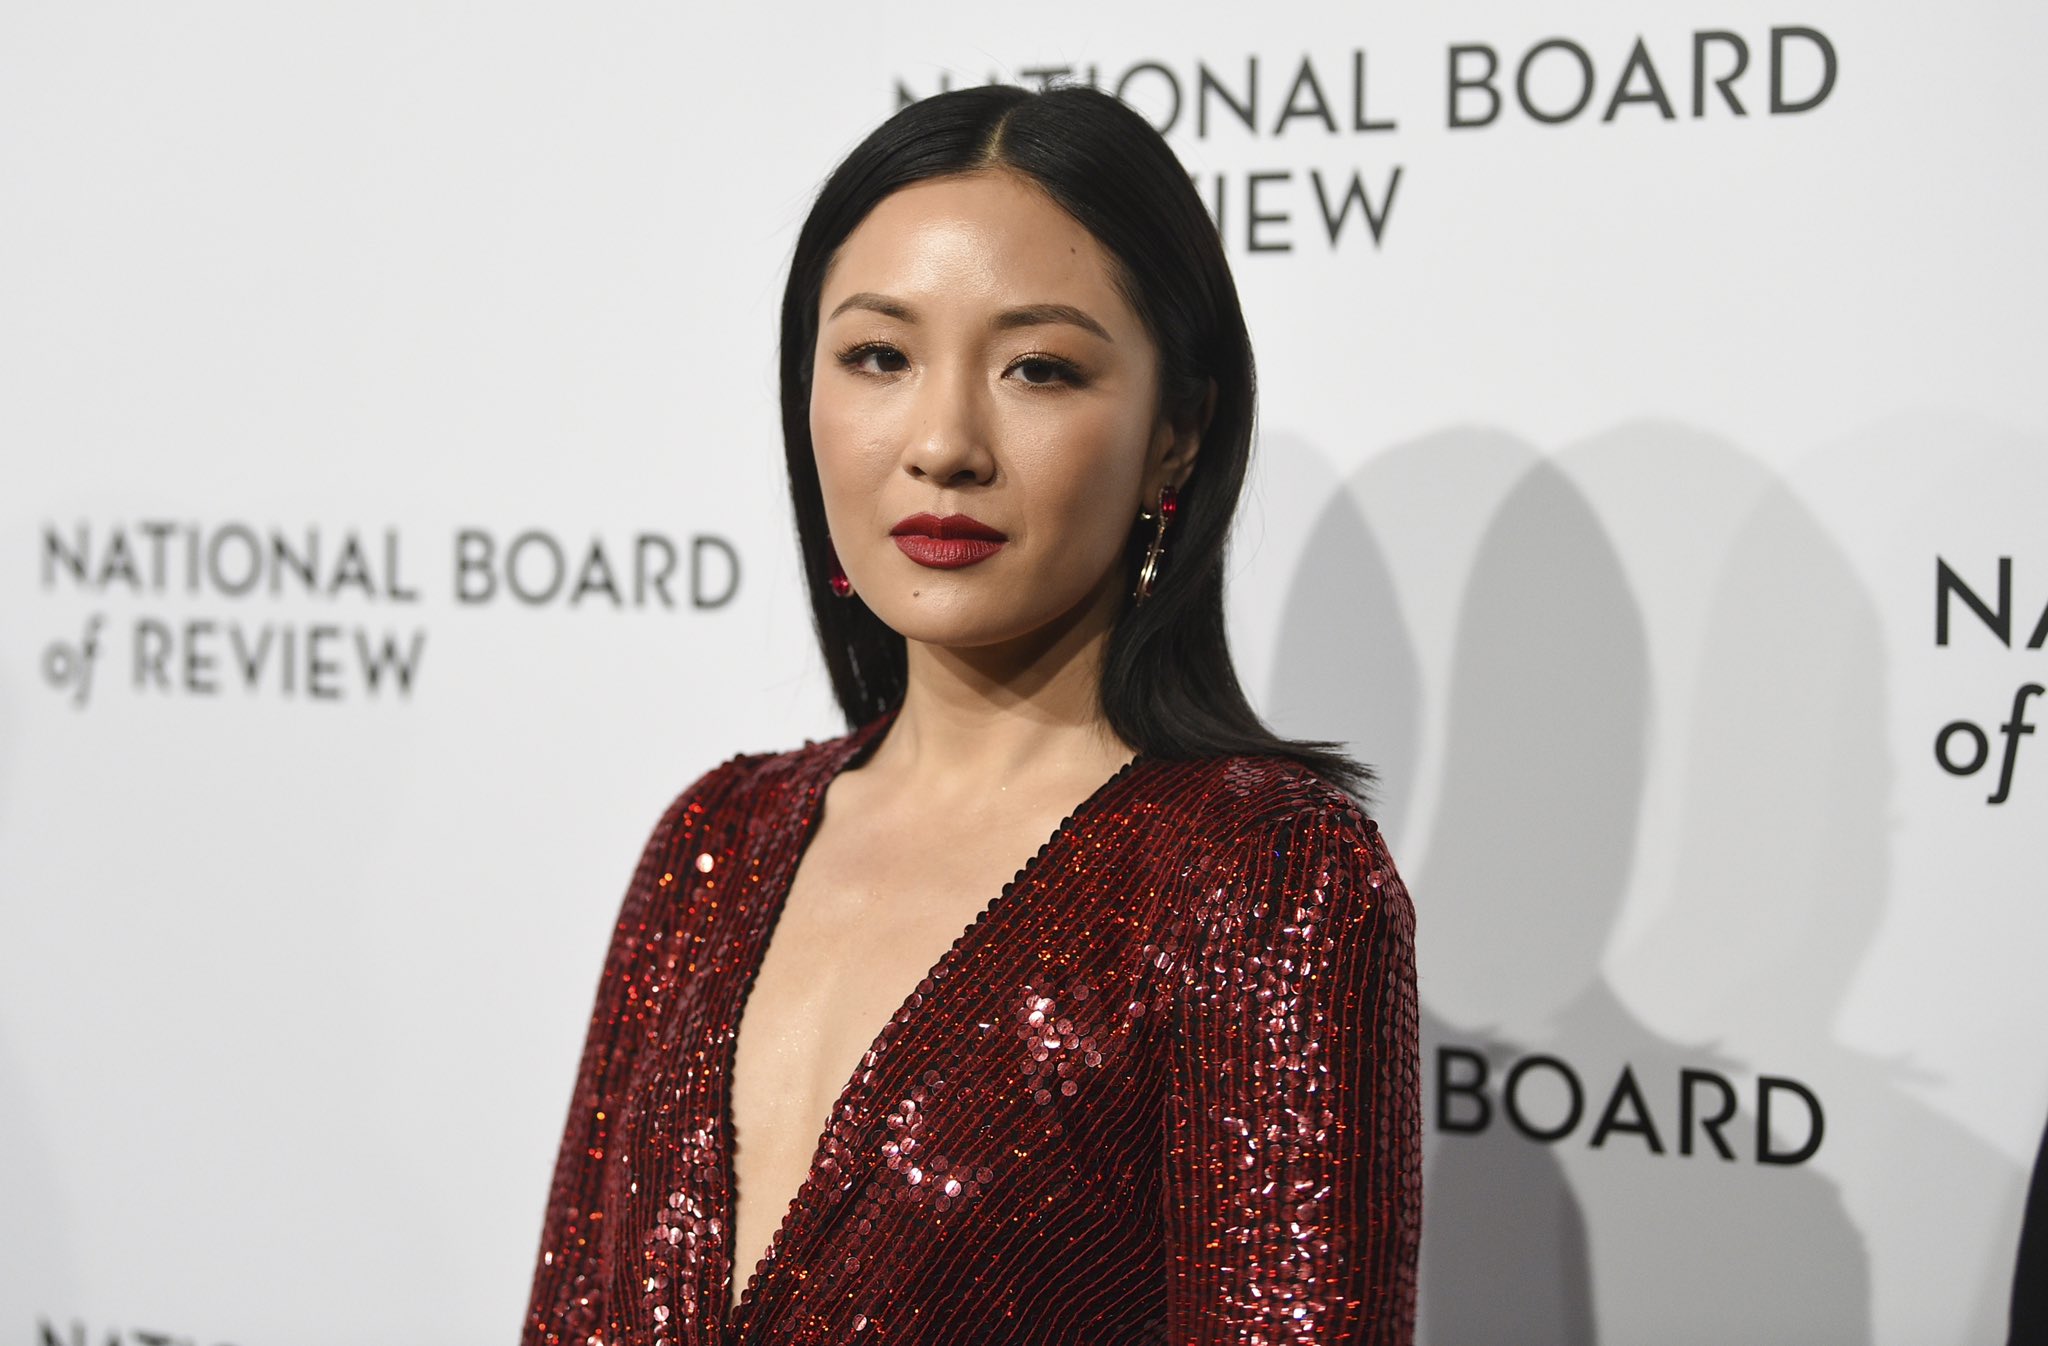 Constance Wu claims ‘sexual harassment’ on set of Fresh Off the Boat set